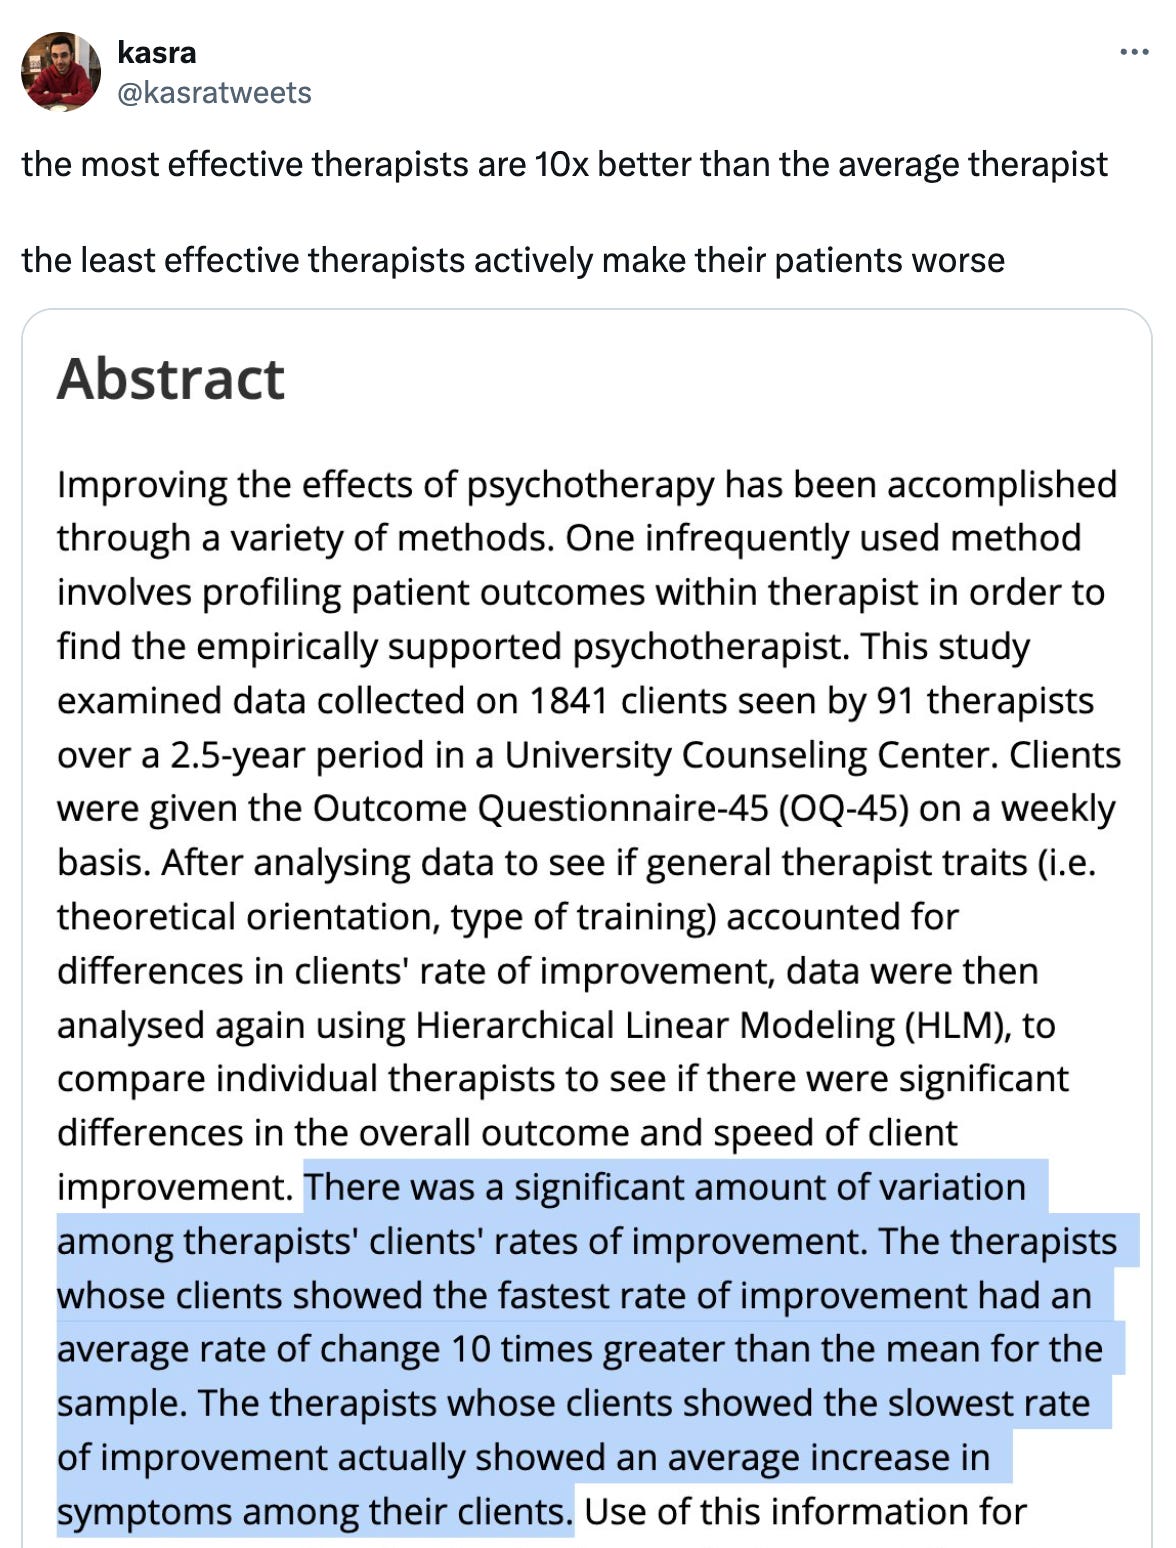  kasra @kasratweets the most effective therapists are 10x better than the average therapist  the least effective therapists actively make their patients worse 4:36 PM · Mar 10, 2024 · 757.1K  Views  kasra @kasratweets · Mar 10 full paper is "Waiting for supershrink: an empirical analysis of therapist effects" by Okiishi et al (2003)  some caveats to the study: limited sample (91 therapists & 1841 patients), one outcome measure (a self-reported questionnaire), and limited to a university counseling… Show more Taha 🫡 @taha_moji · Mar 10 How to find a great therapist? kasra @kasratweets · Mar 10 don’t have a great answer sadly ☹️ I’ve had good and bad ones personally but never a truly transformative one  maybe just asking around for lots of recommendations? Show replies POLITICOEurope @POLITICOEurope Ad Drive your policy decision-making forward with POLITICO’s Research & Analysis Division.   Fusing our journalistic prowess and trove of legislative intelligence, we craft comprehensive analyses to take your policy expertise to the next level, so you can get ahead. From politico.eu Rusty Shackleford @JamesRKirk · Mar 10 my thesis is the definition of "best" and "worst" kasra @kasratweets · Mar 11 woah! can i read more somewhere? Matthew Cooke @thematthewcooke · Mar 13 Fascinating! Does the study indicate the overall average effectiveness of therapy? How often or likely are therapists to make their patients worse? kasra @kasratweets · Mar 13 yep in this study they have a graph showing the average overall effect, as well as the effect of the best (#1) and worst (#56) therapists in the study (the y-axis is self-reported symptoms, so a lower score is better). the average effect is slightly positive, the worst therapist… Show more brian ! @brianbrianmuh · Mar 10 2003 tho kasra @kasratweets · Mar 11 it is a while ago, but unfortunately the more recent literature is not particularly promising  "the efforts of more than 40 years have not yielded a discernible improvement in the overall effectiveness of psychological therapies" (2021 handbook of psychotherapy and behavior… Show more